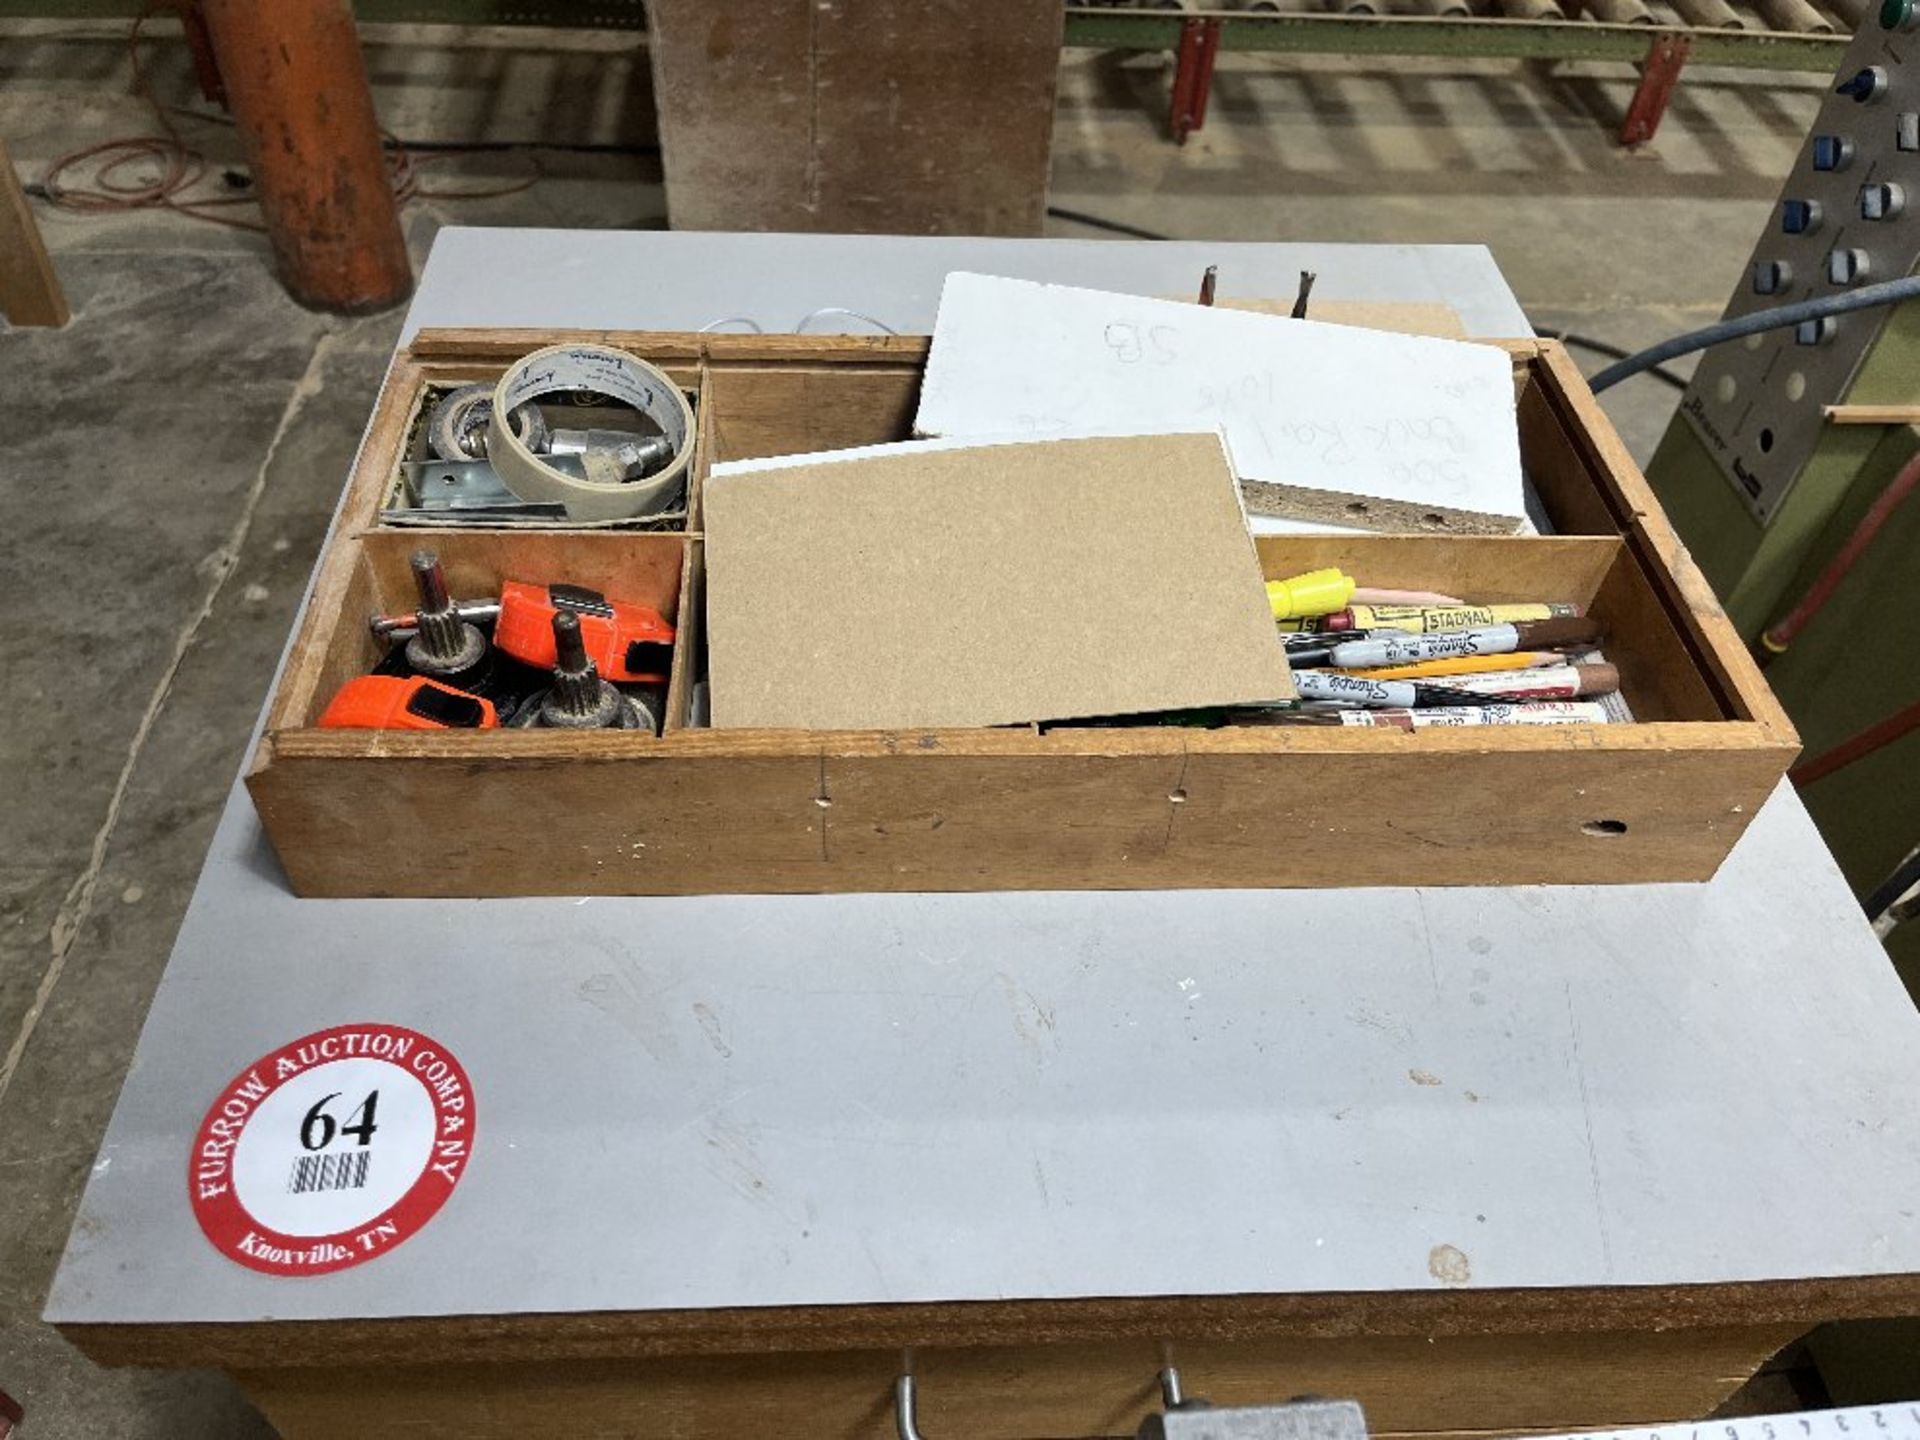 Wooden Cabinet on Casters plus Contents - Tooling for Biesse Beaver, Screws, Fasteners, etc. - Image 2 of 2